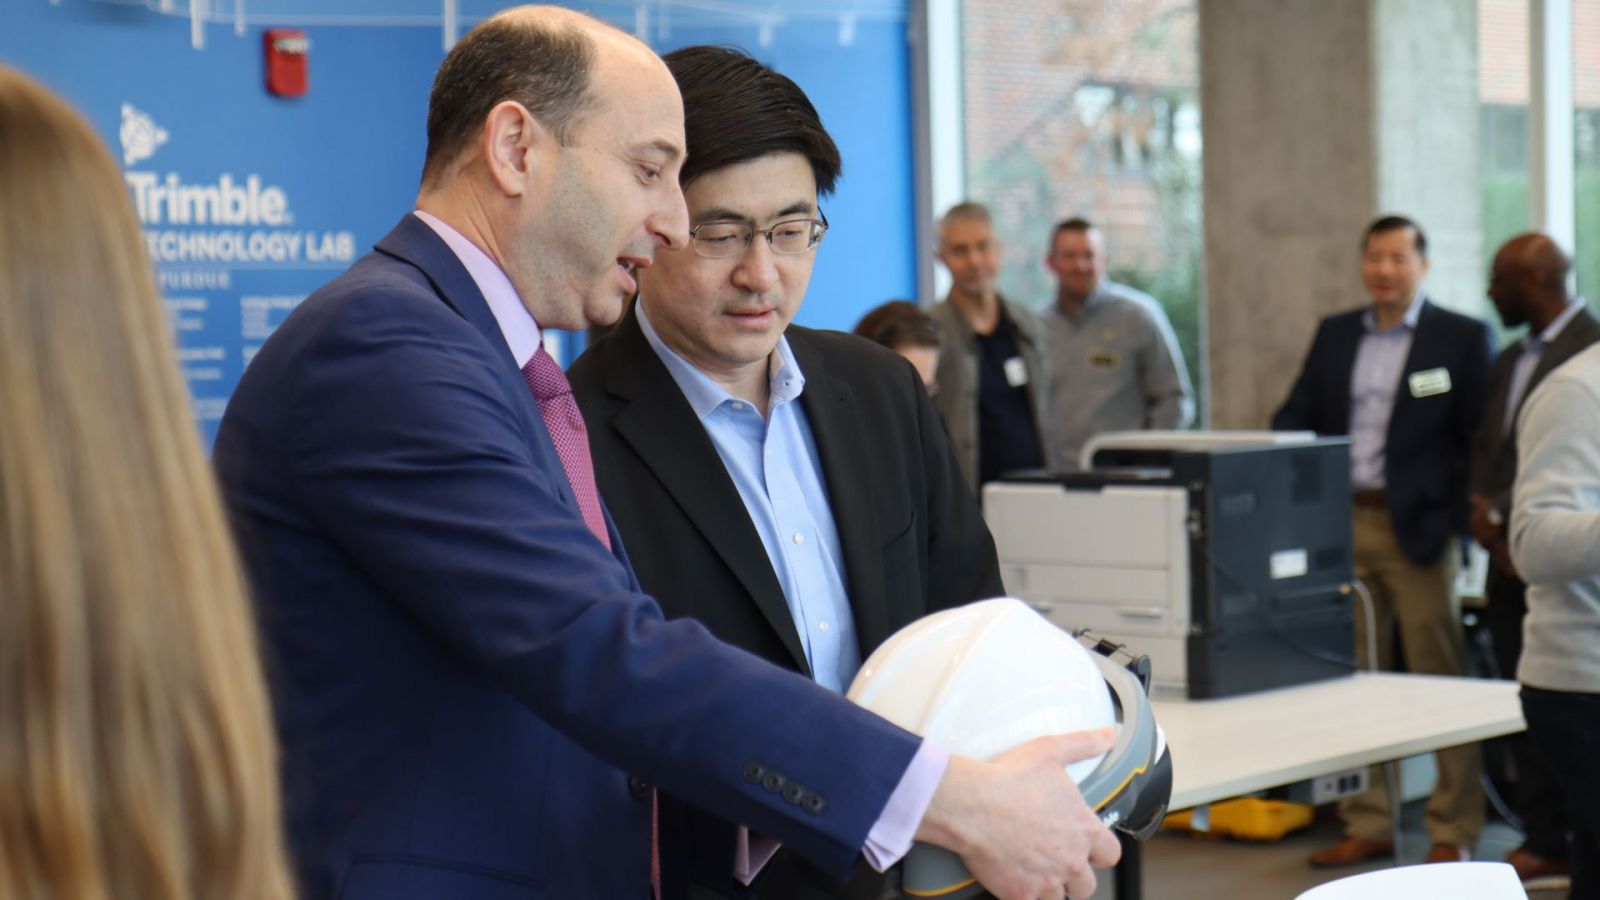 Purdue President Mung Chiang (right) speaks with Purdue's leading faculty contact for Trimble, Nicholas Dib, about how the company's software is used in extended-reality headsets. (Purdue University photo/Zach Rodimel)